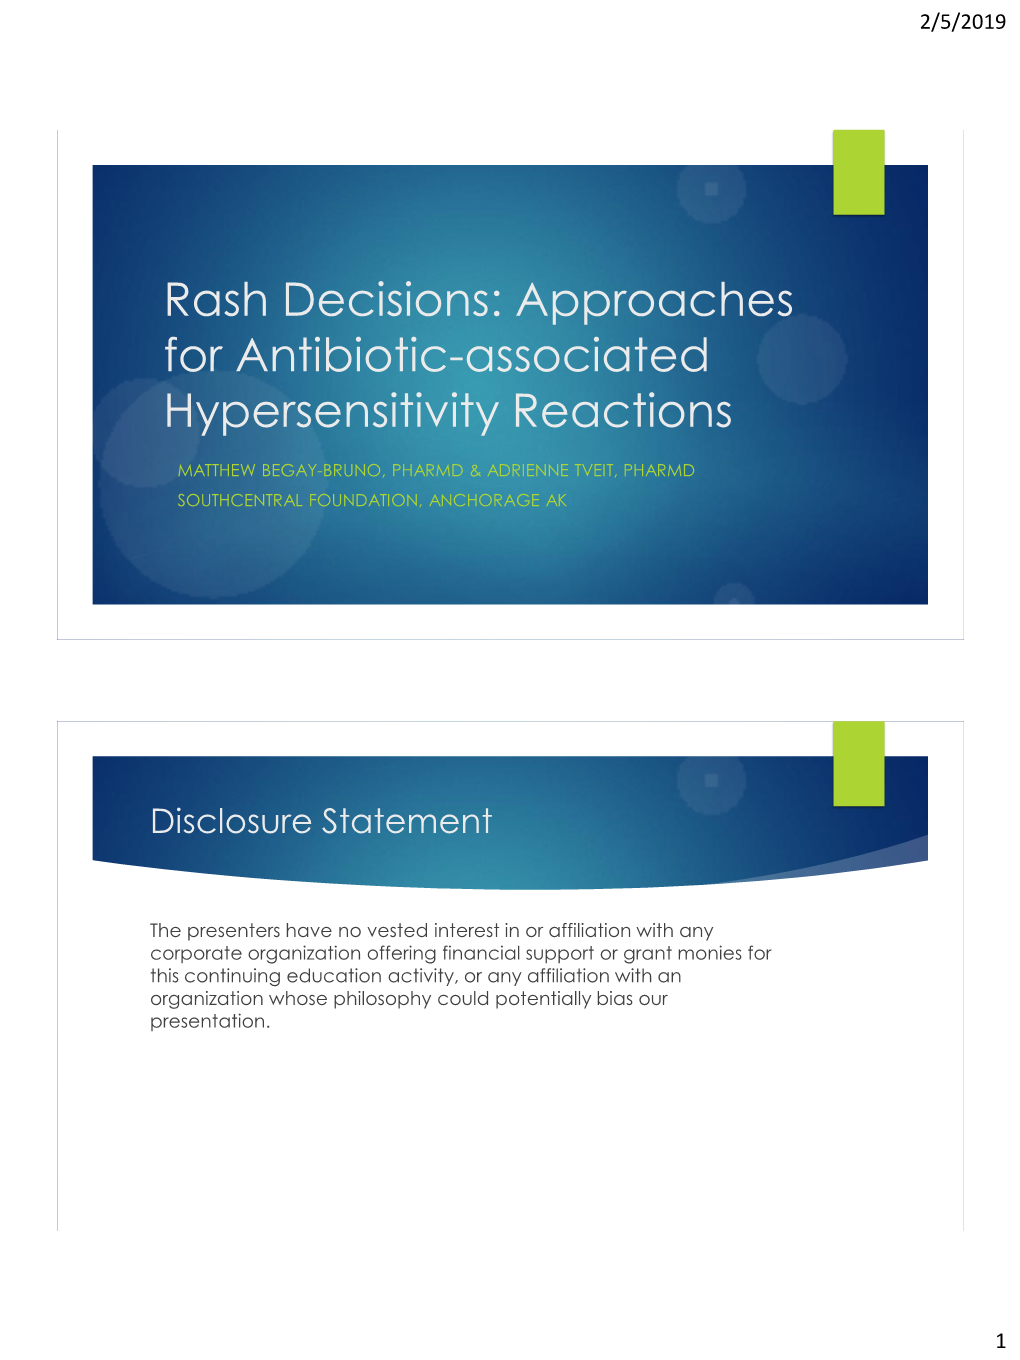 Rash Decisions: Approaches for Antibiotic-Associated Hypersensitivity Reactions